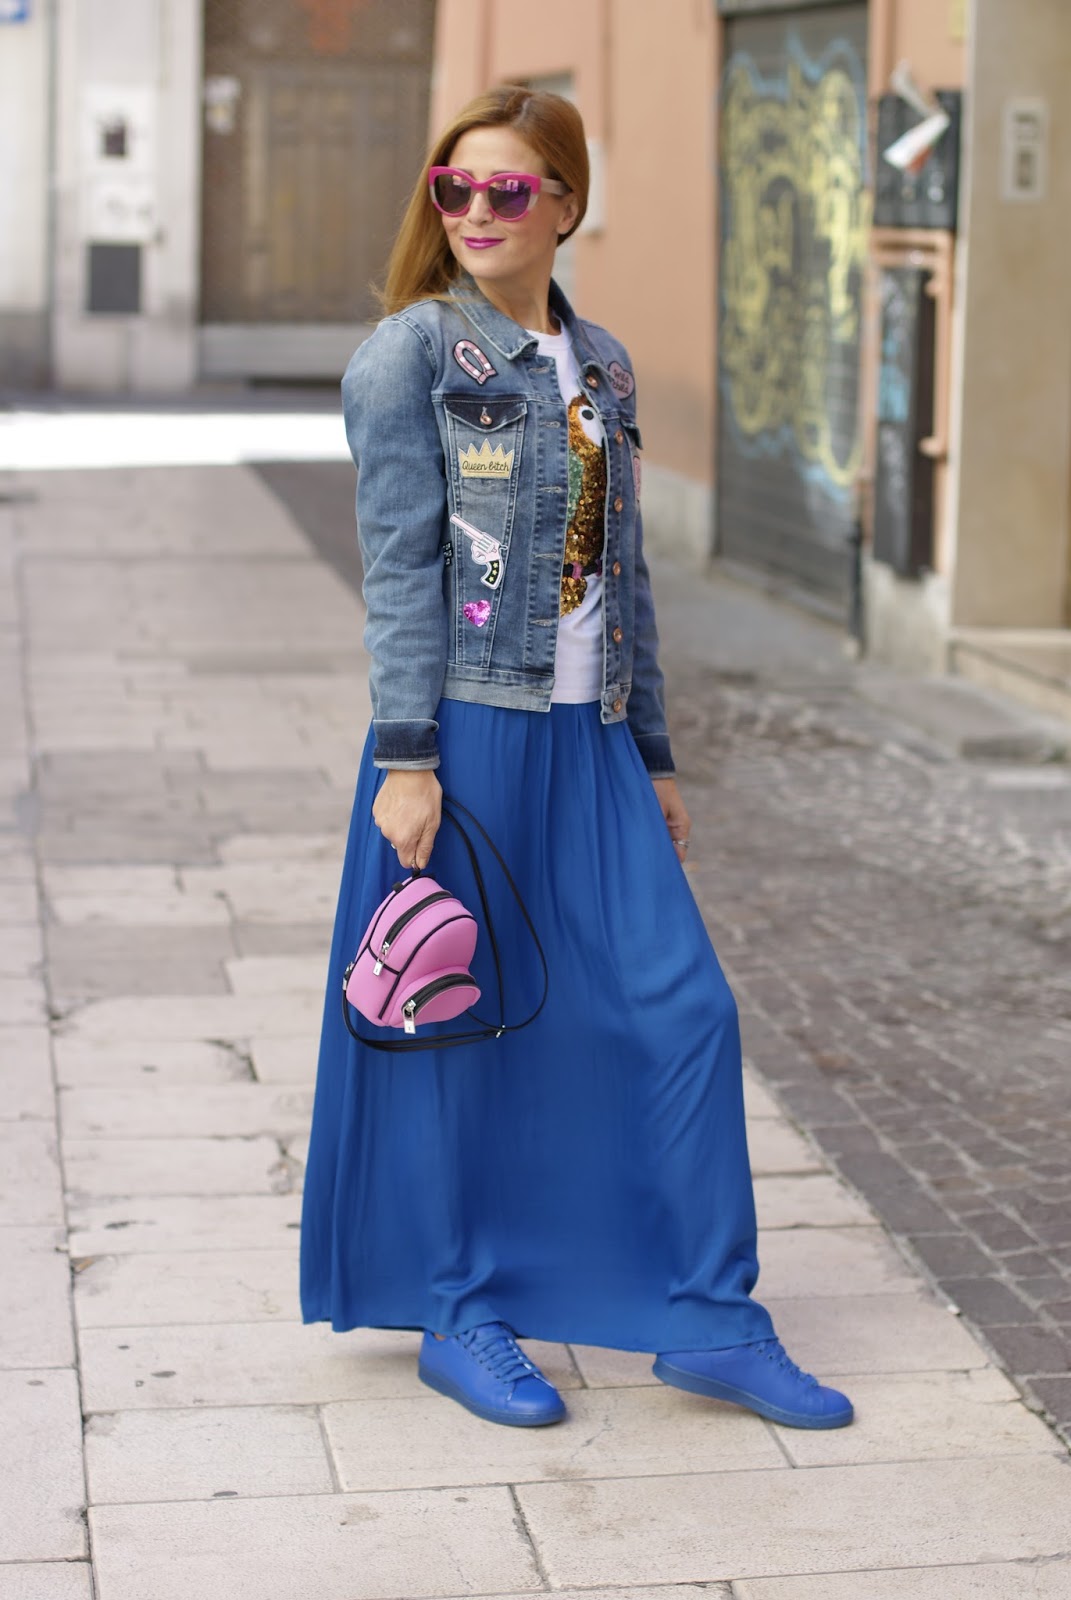 Denim jacket with patches and Save My Bag backpack on Fashion and Cookies fashion blog, fashion blogger style